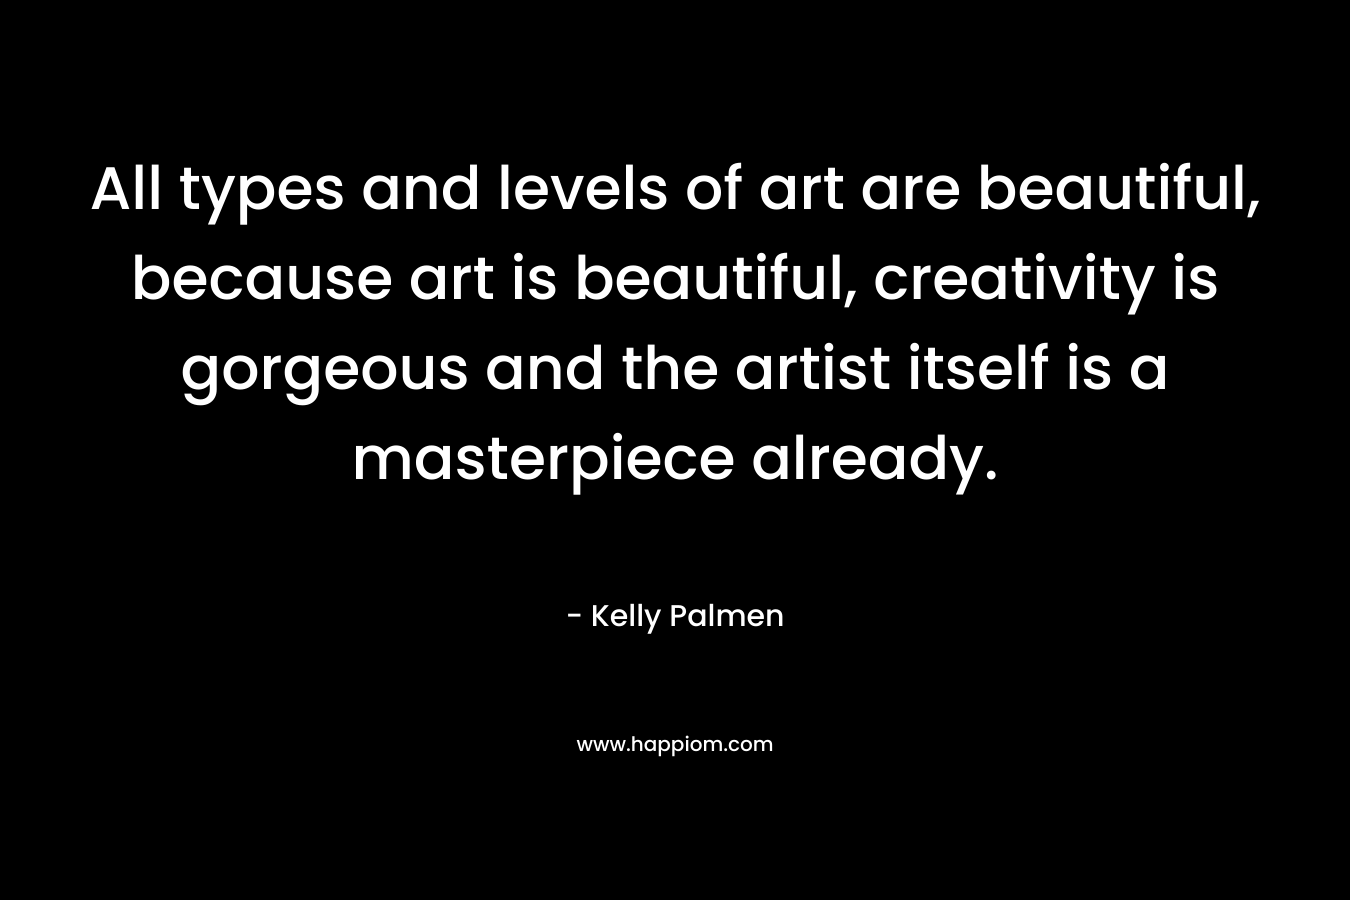 All types and levels of art are beautiful, because art is beautiful, creativity is gorgeous and the artist itself is a masterpiece already.